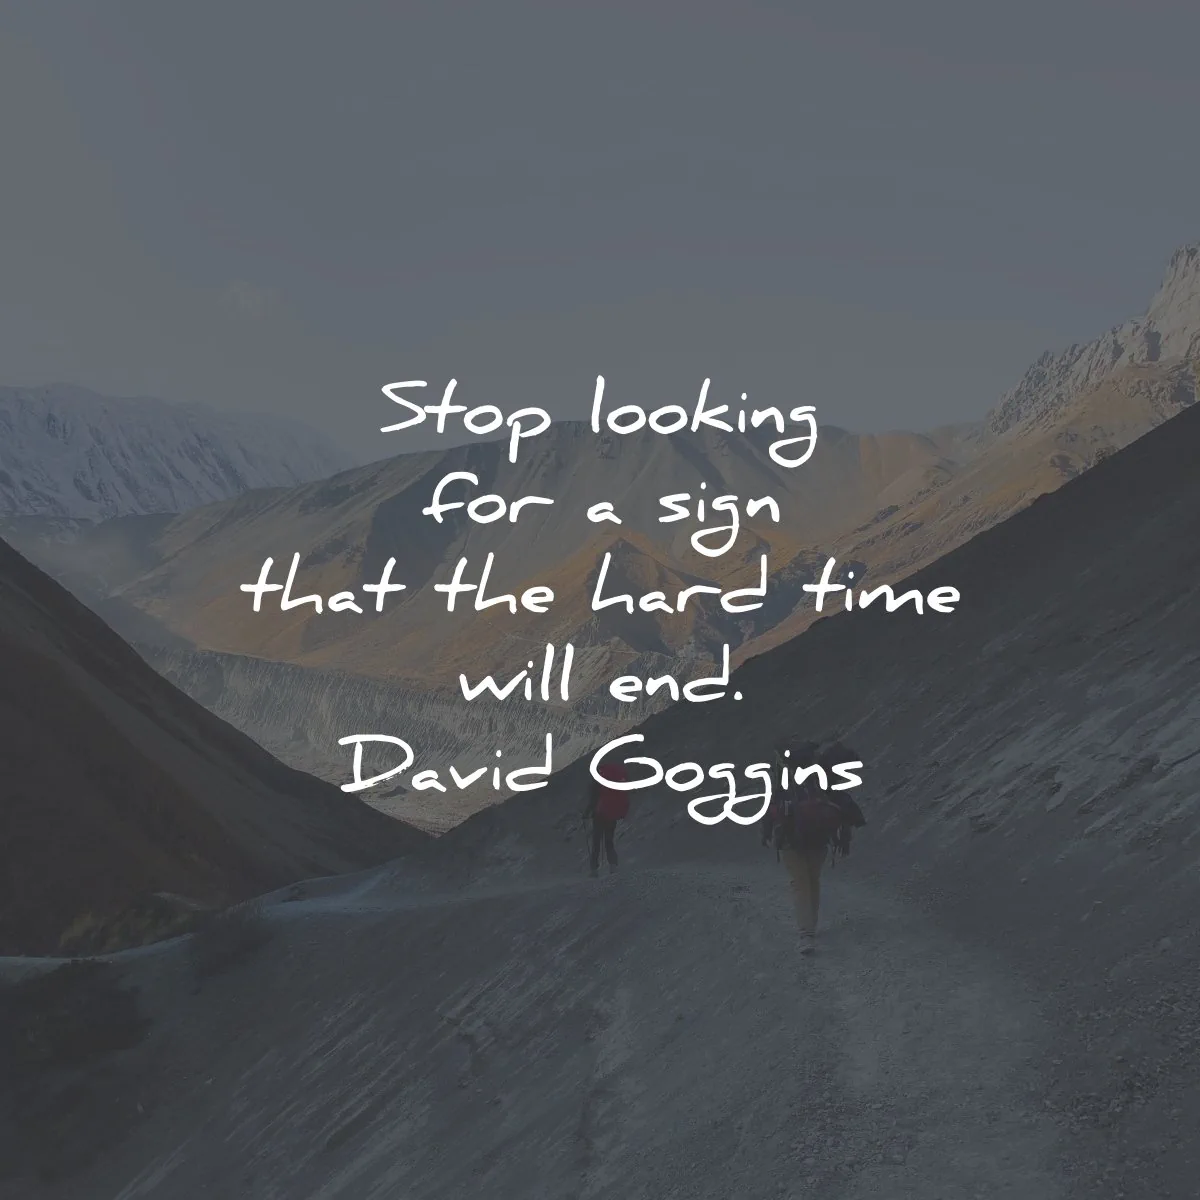 david goggins quotes stop looking hard time end wisdom